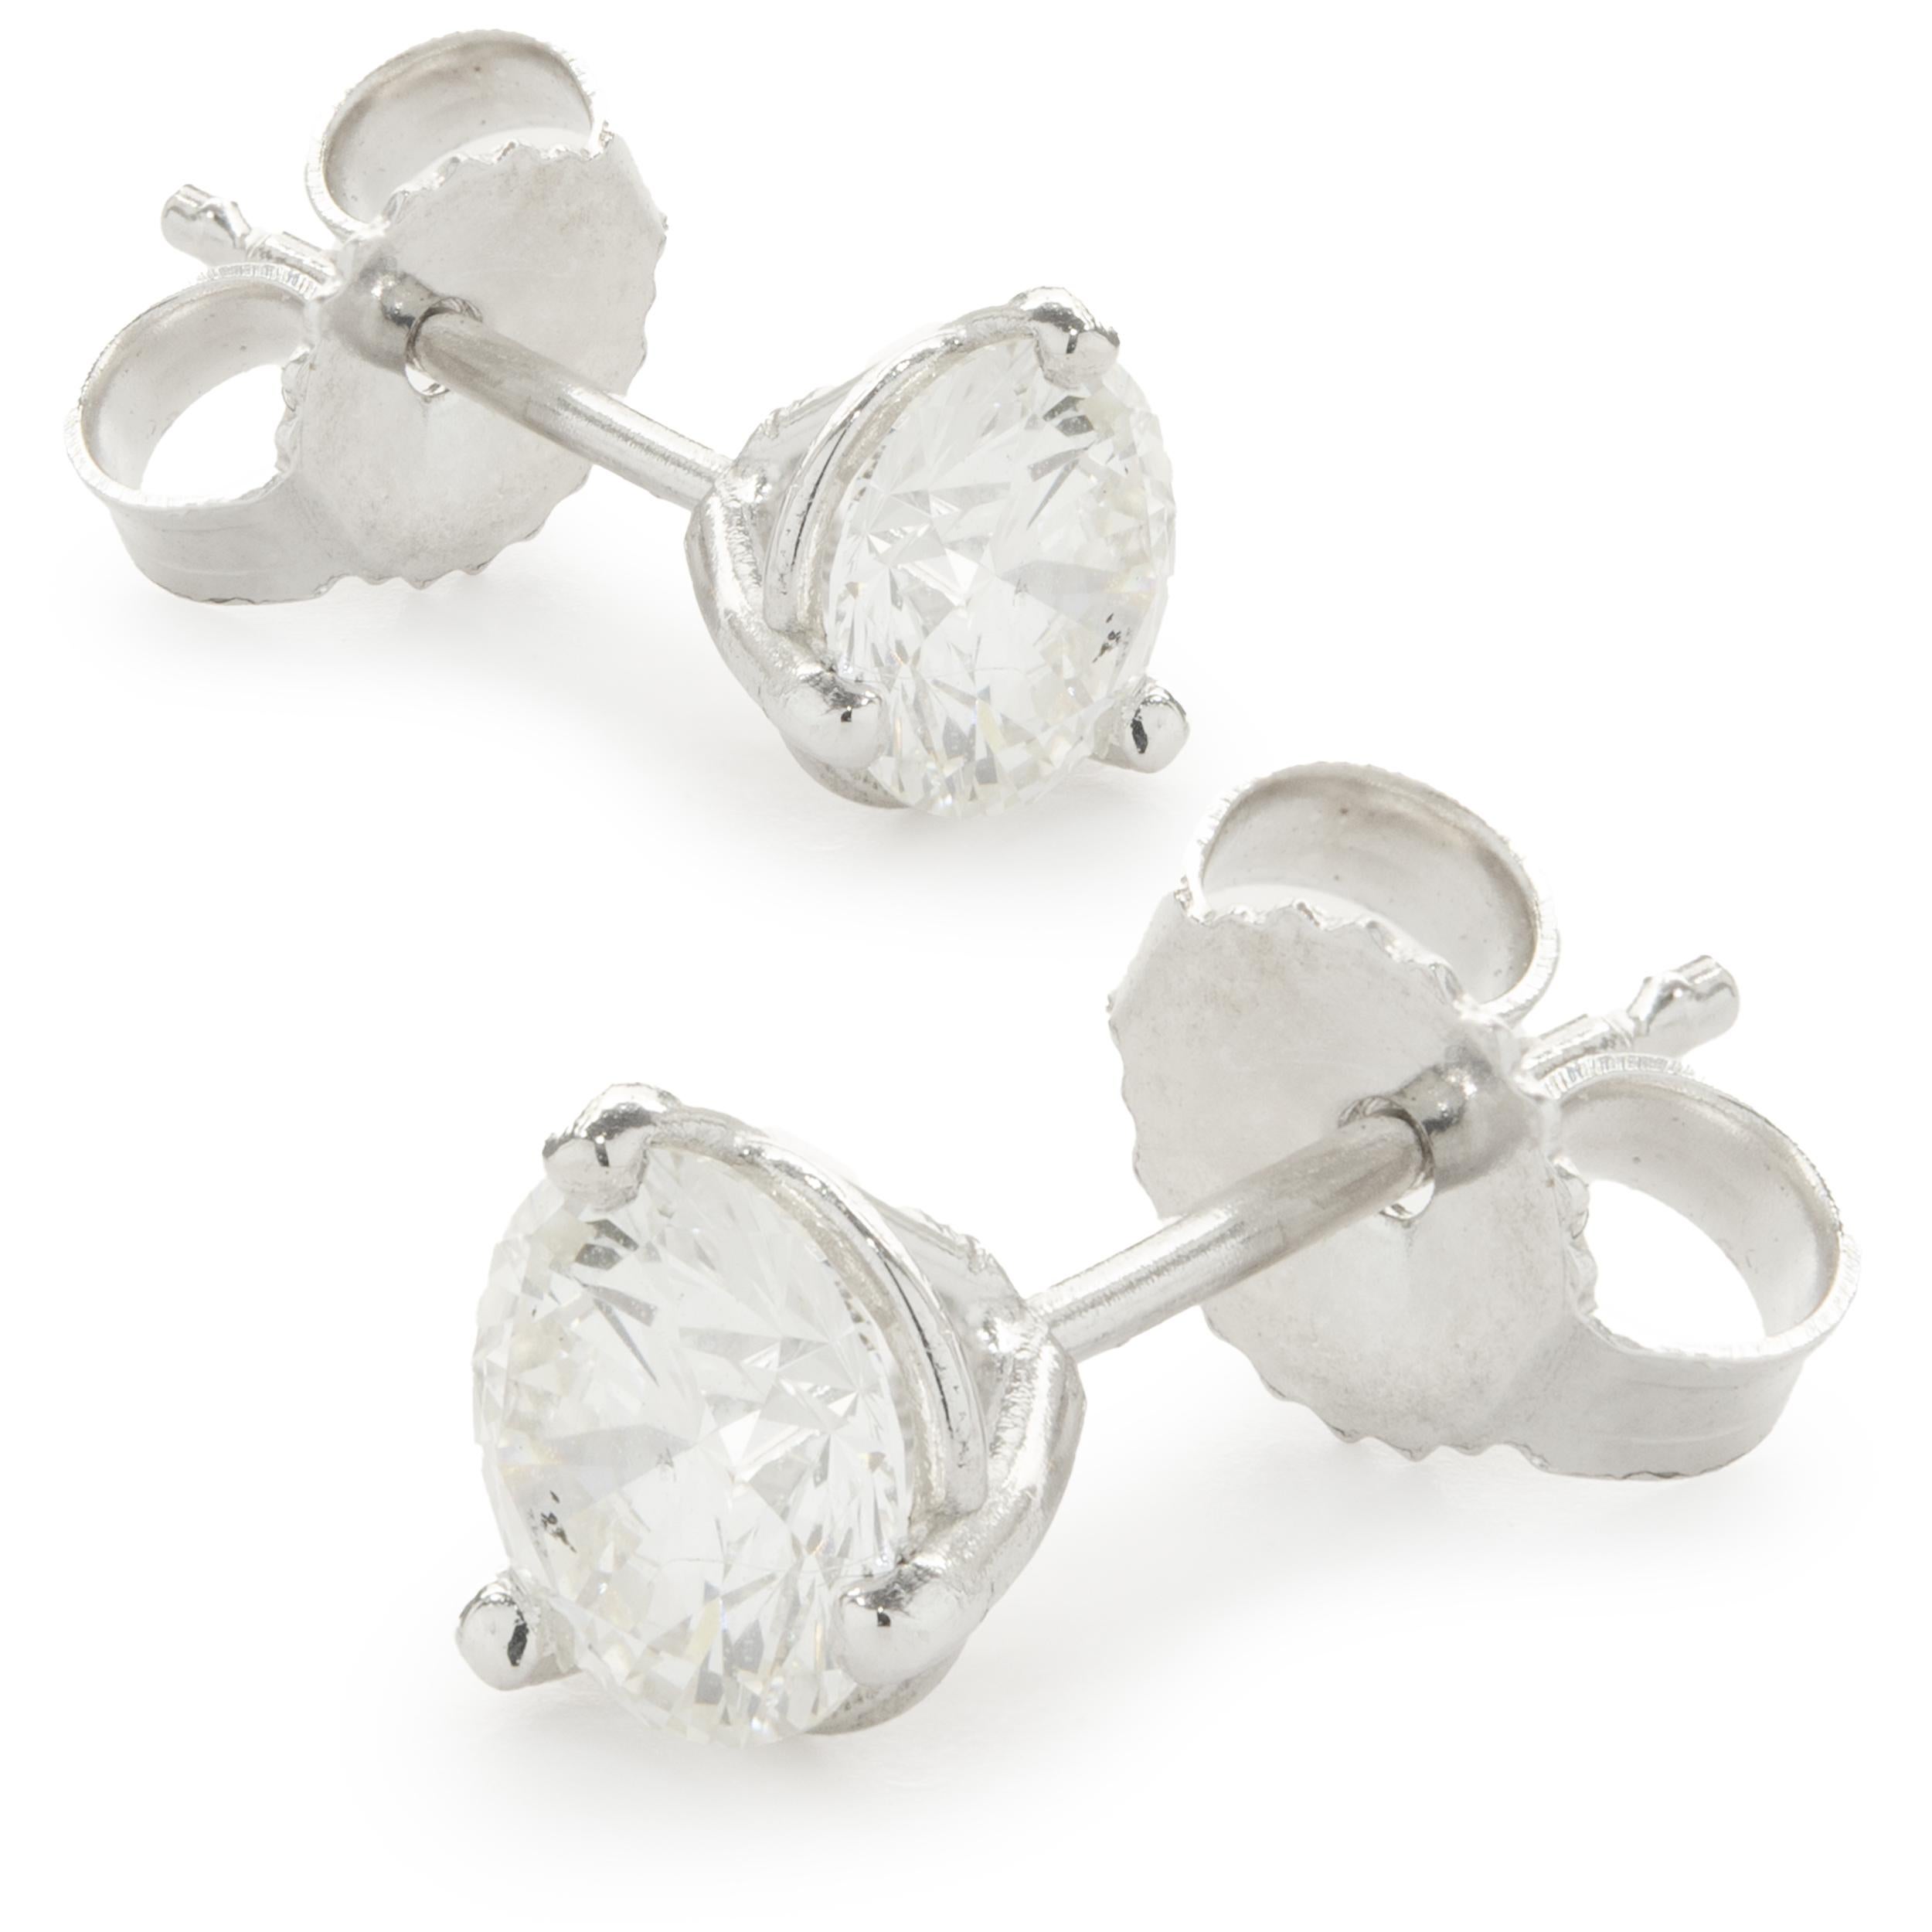 Material: 14k white gold
Diamonds: 2 round brilliant cut = 0.85cttw
Color: G / I
Clarity: VS2
Dimensions: earrings measure approximately 5.10mm in diameter
Fastenings: post with friction backs
Weight: 0.90 grams